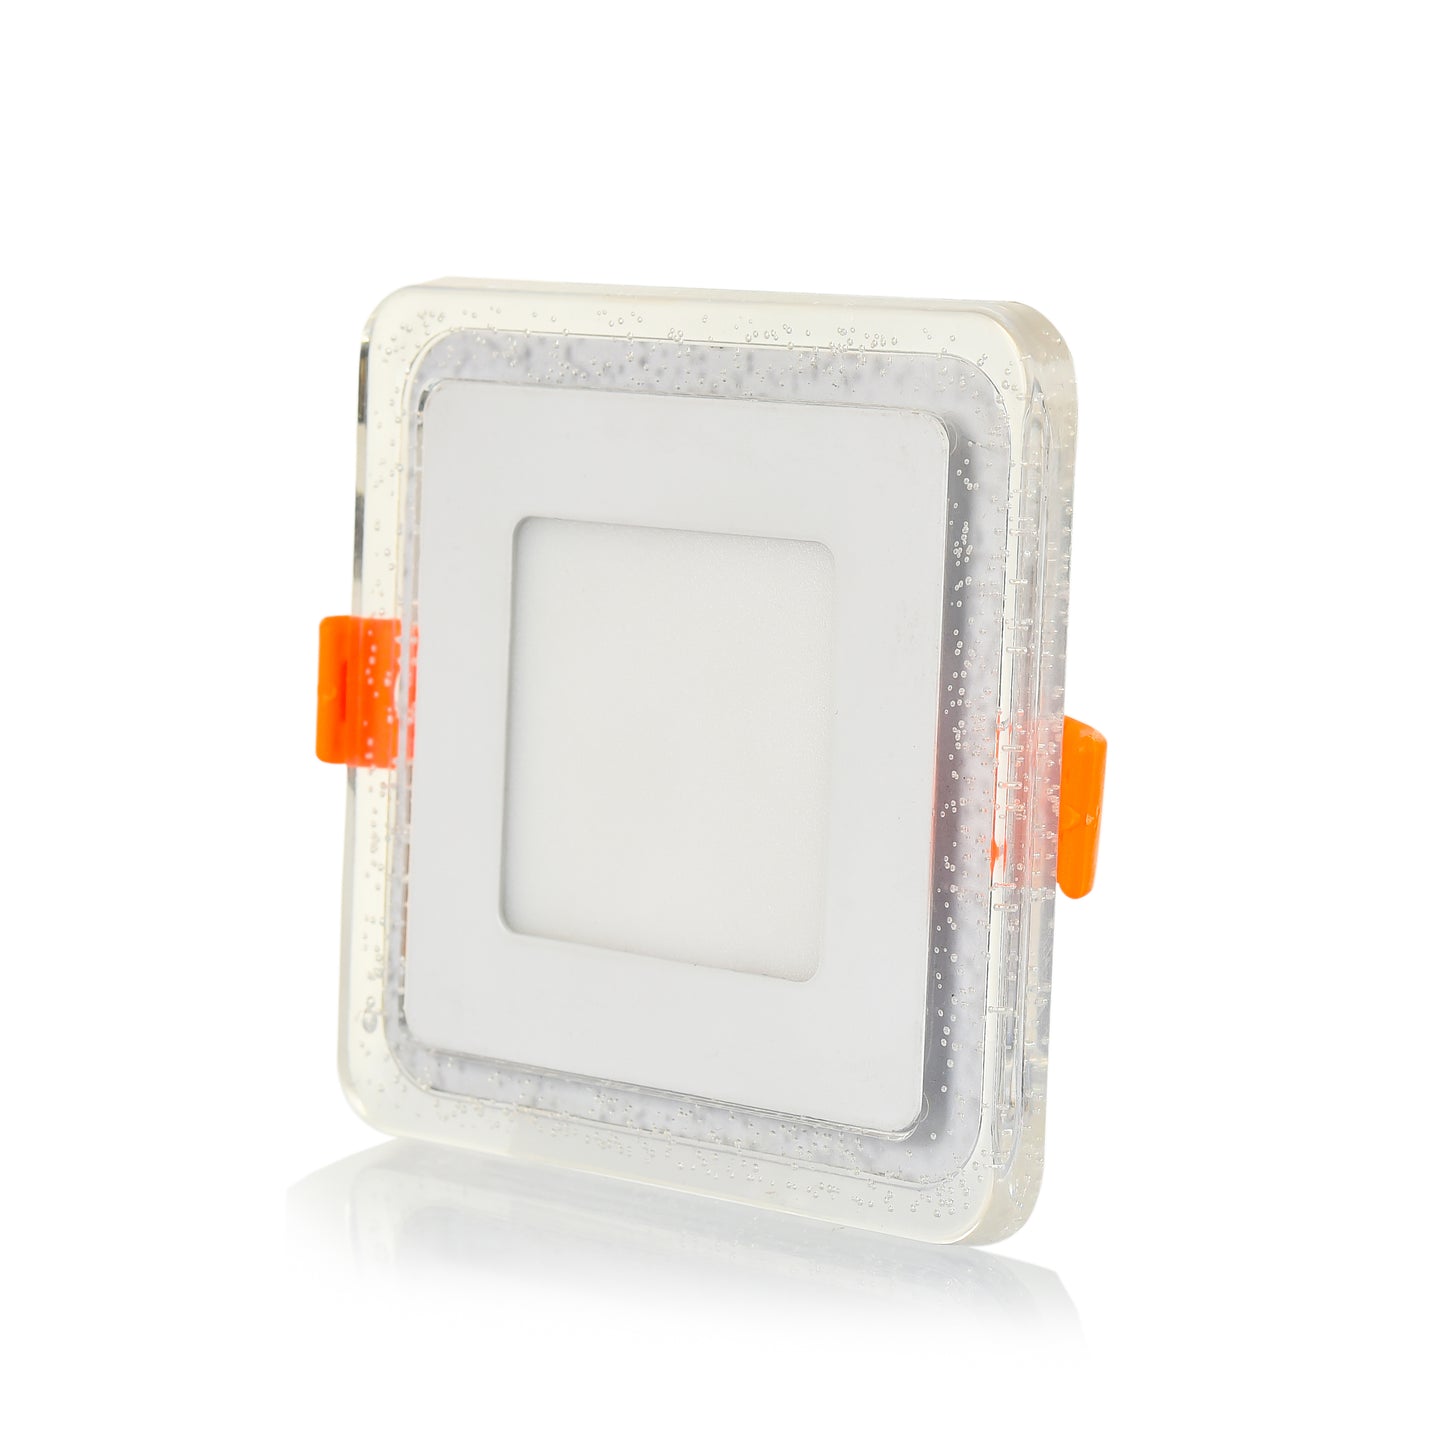 Murphy 3W+3W Bubble LED 2-IN-1 Double Color Square Panel Light